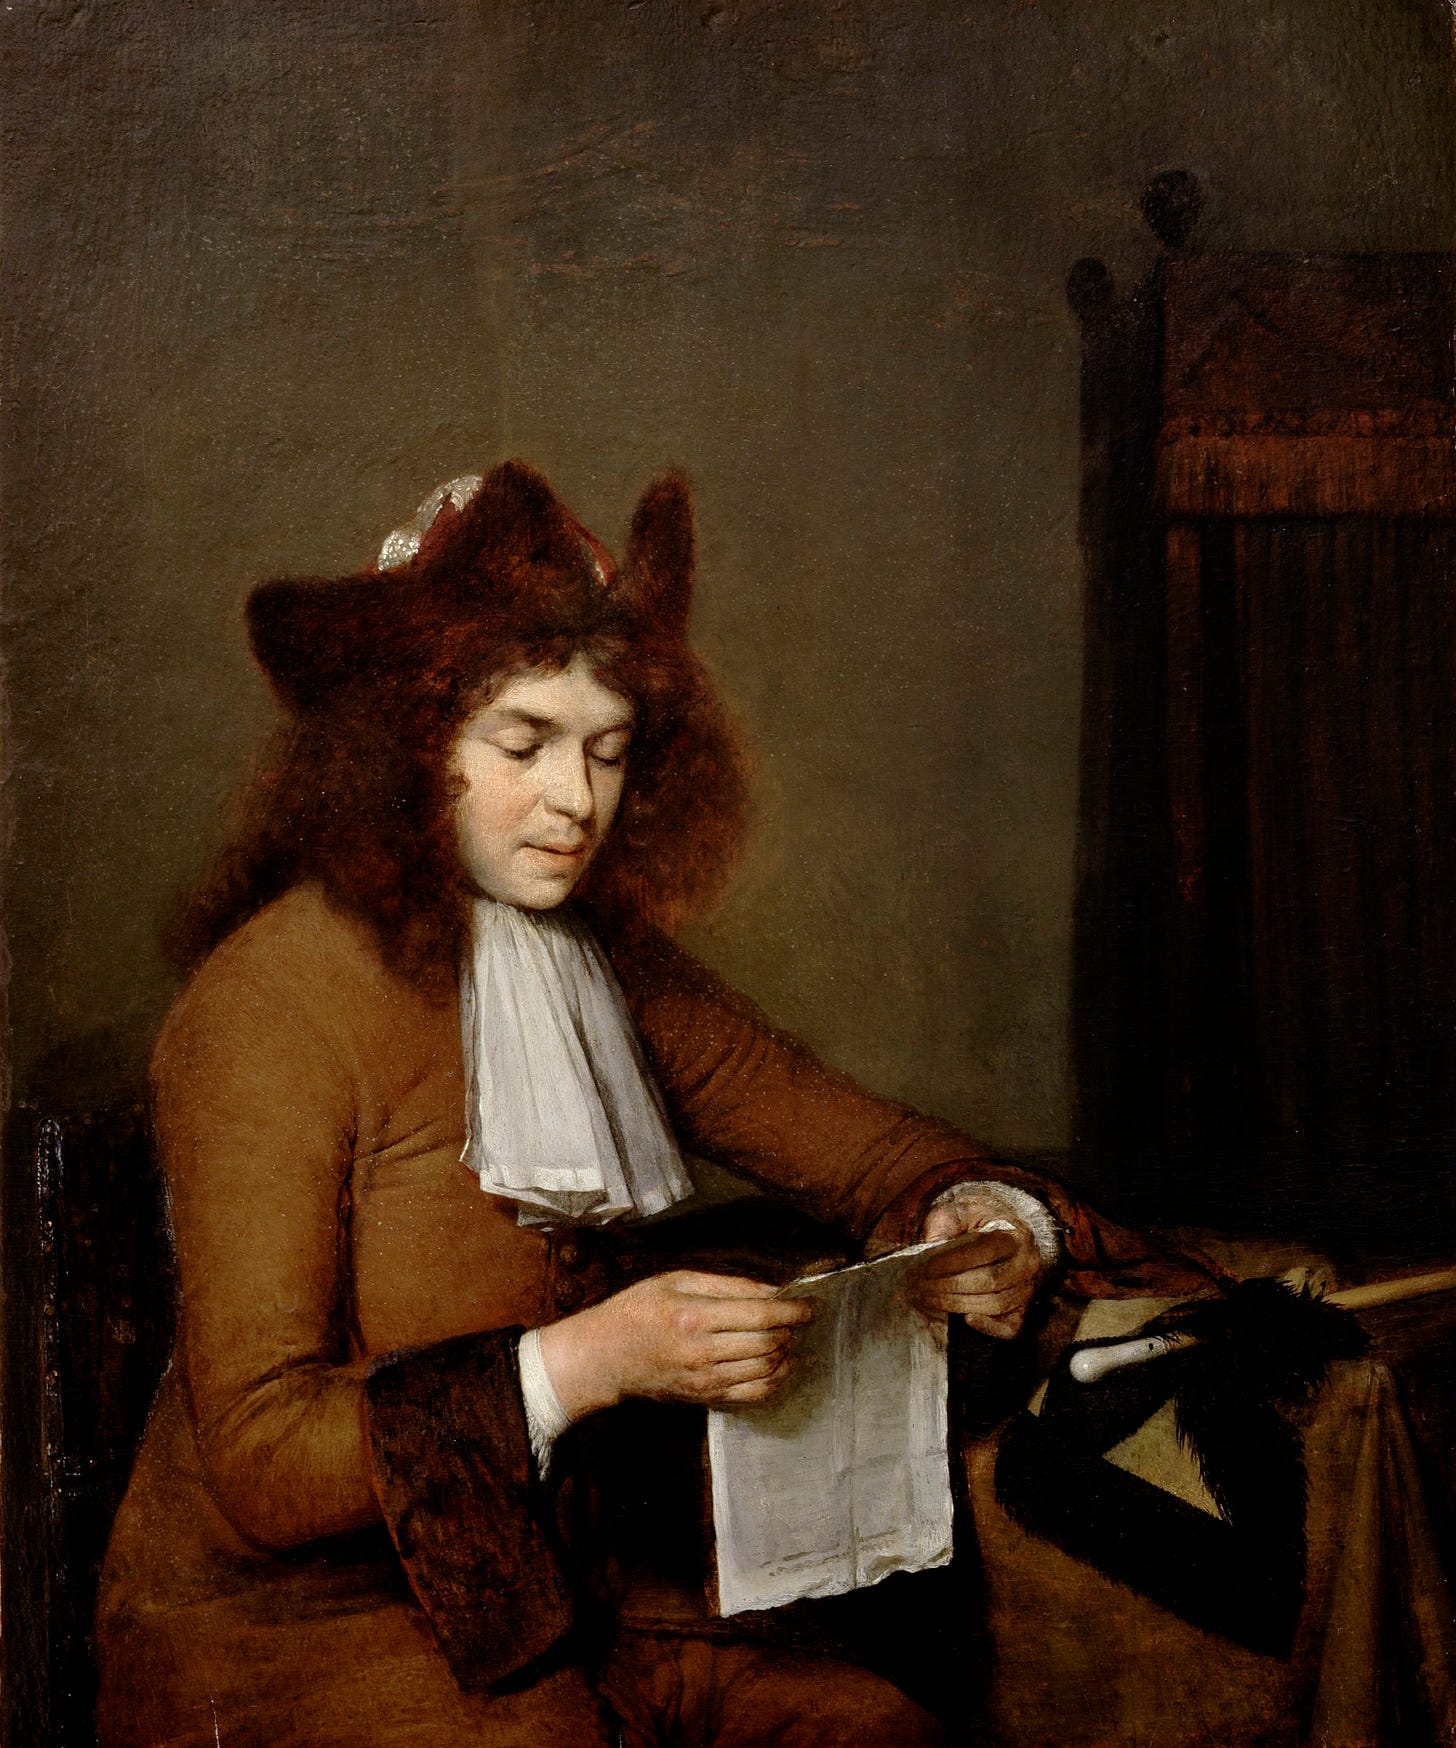 File:Gerard ter Borch - Young Man Reading 29.256 o2.jpg - Wikimedia Commons